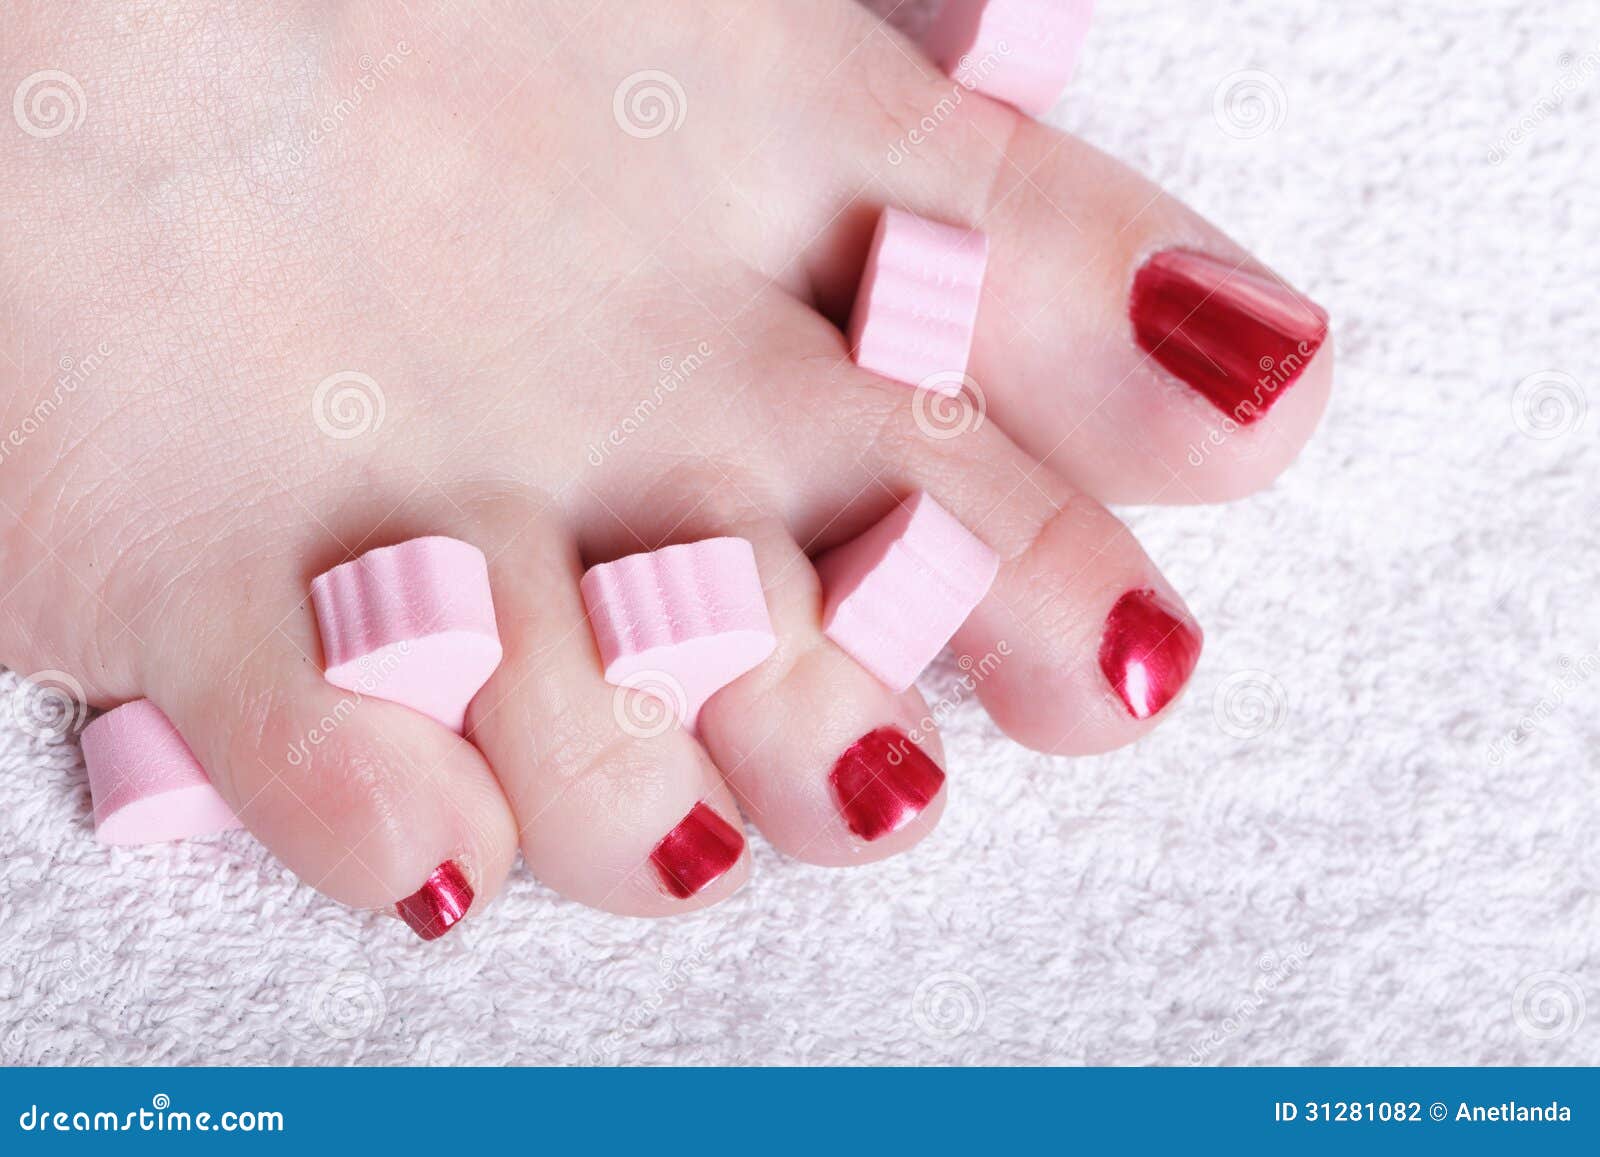 Female Feet Red Polished Nails Stock Photo - Image of beauty, footcare ...